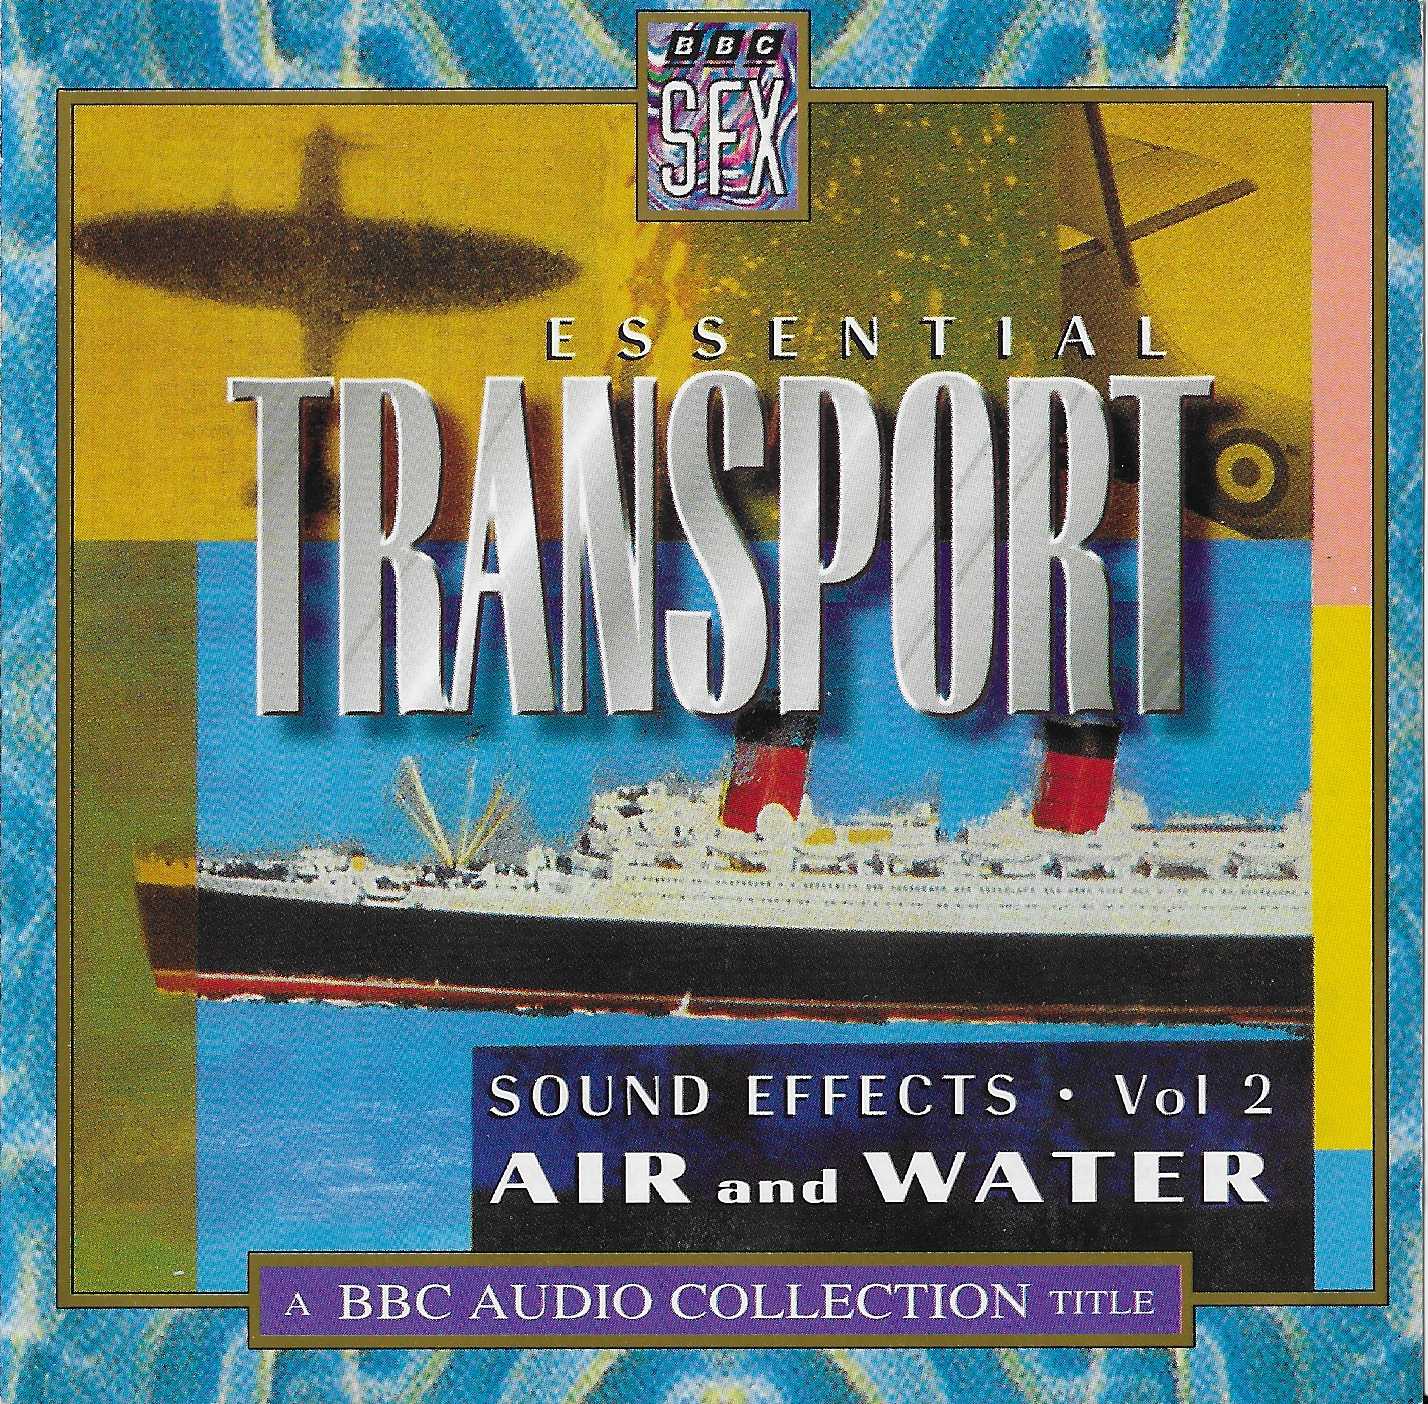 Picture of BBCCD866 Essential transport sound effects - Volume 2 by artist Various from the BBC cds - Records and Tapes library